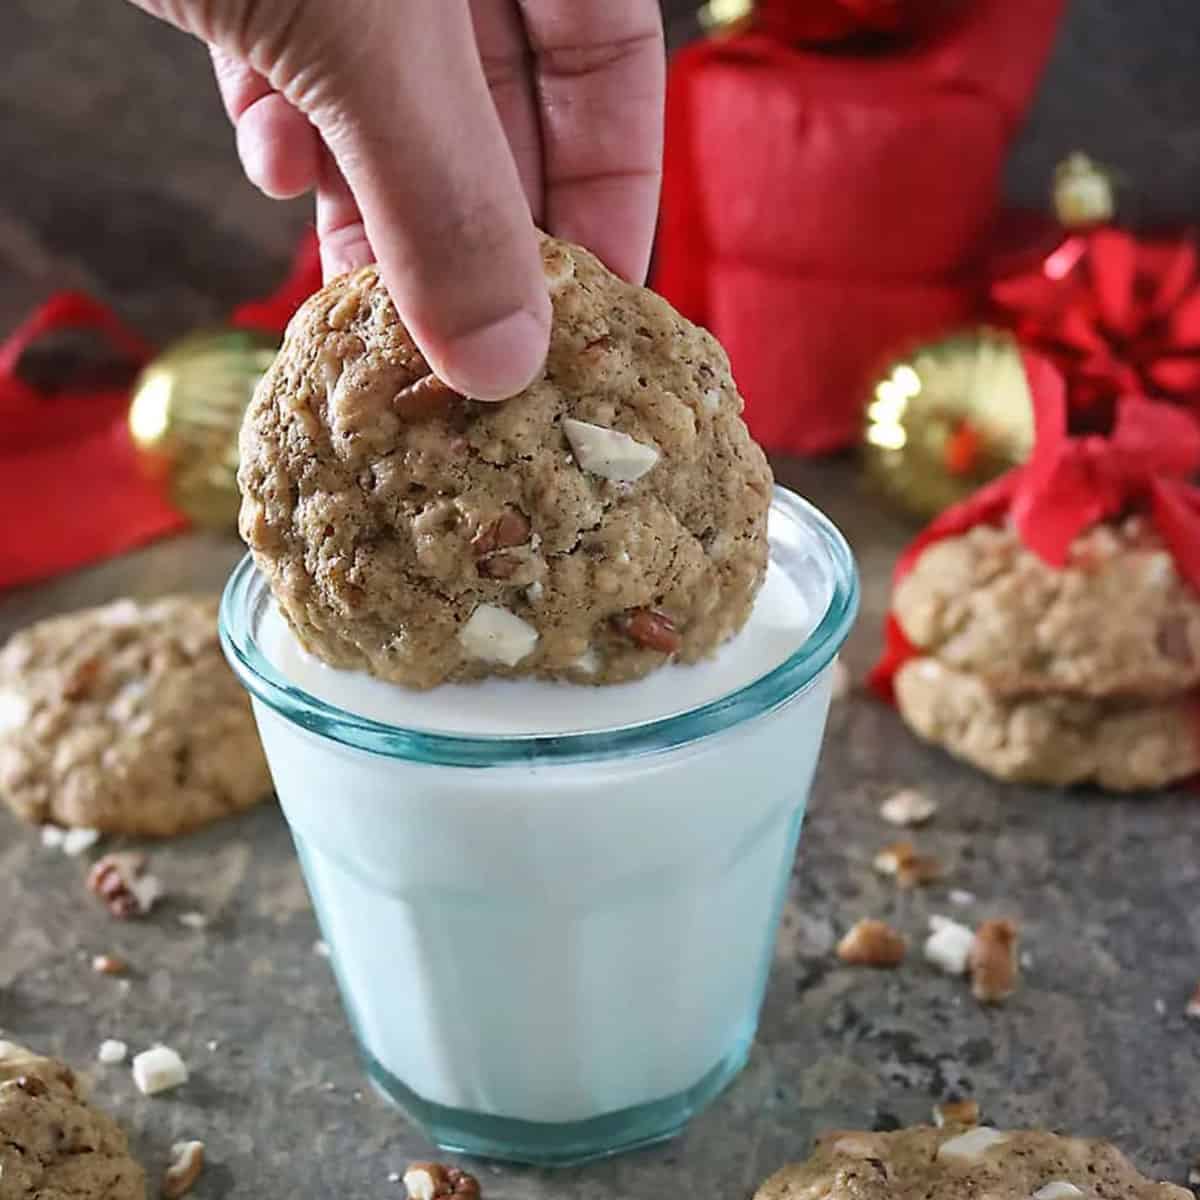 A cookie being dunked in a glass of milk.